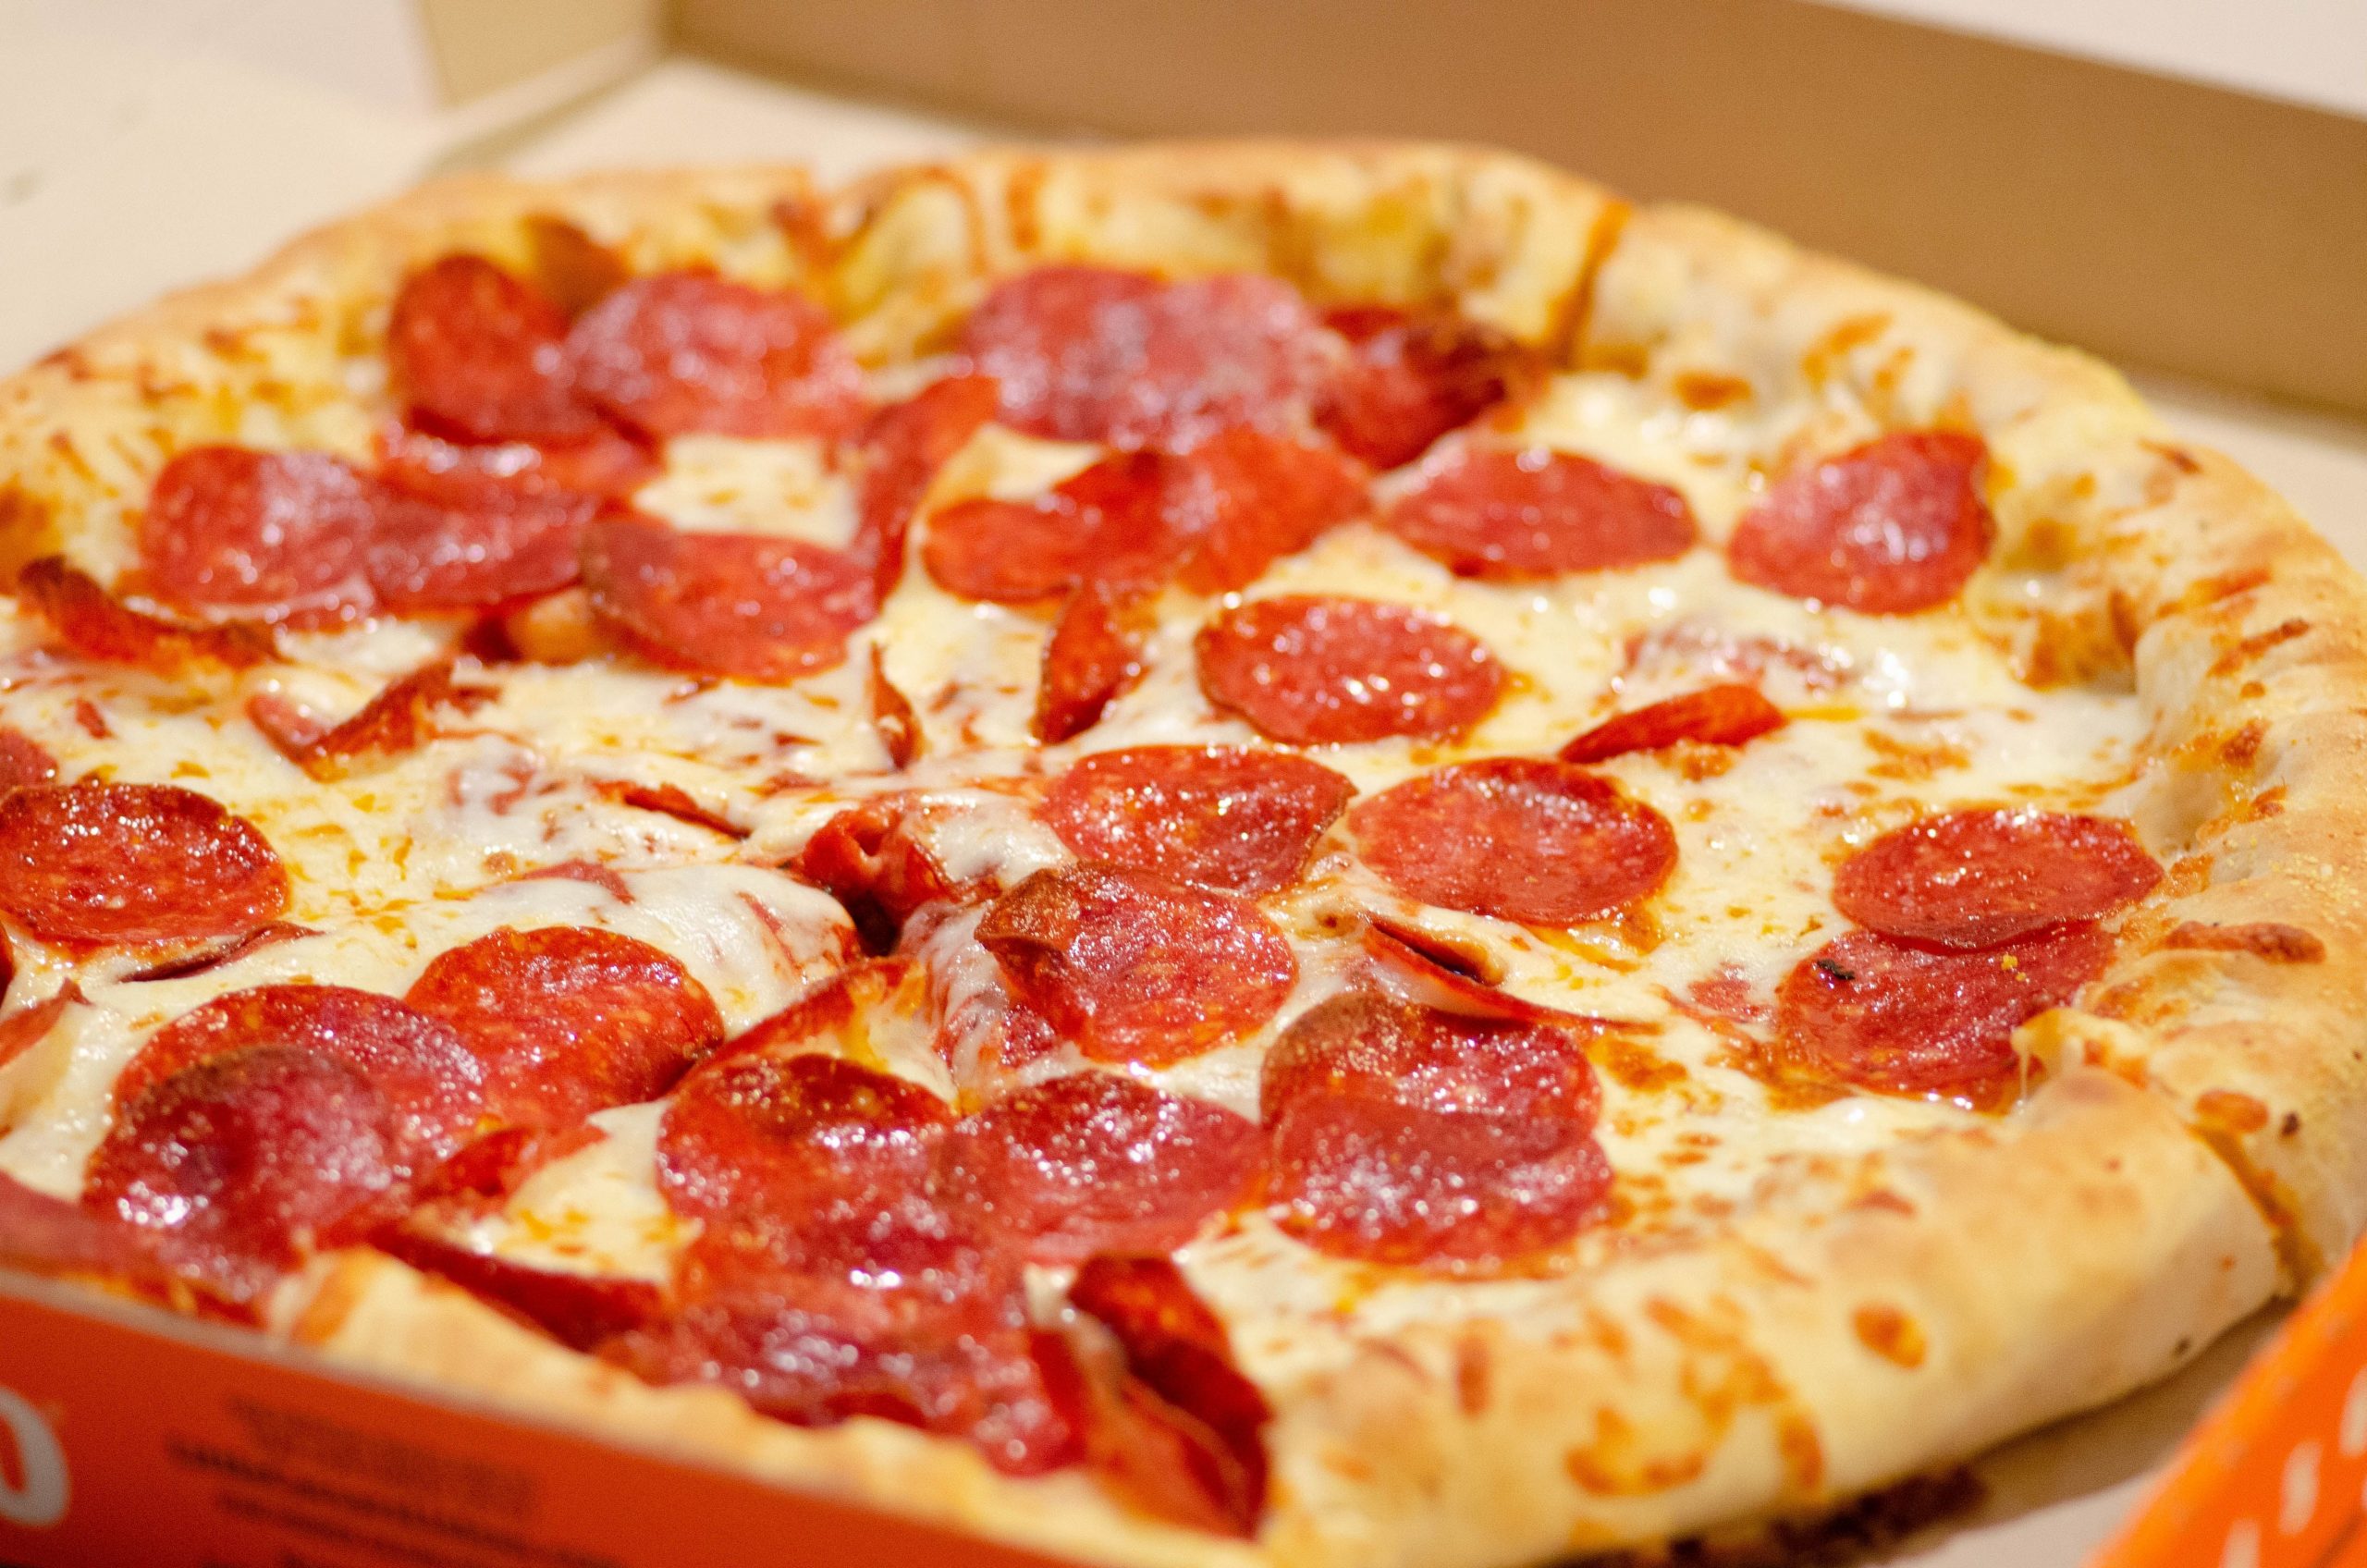 13,000 pounds of Home Run Inn frozen meat pizzas recalled due to possible contamination